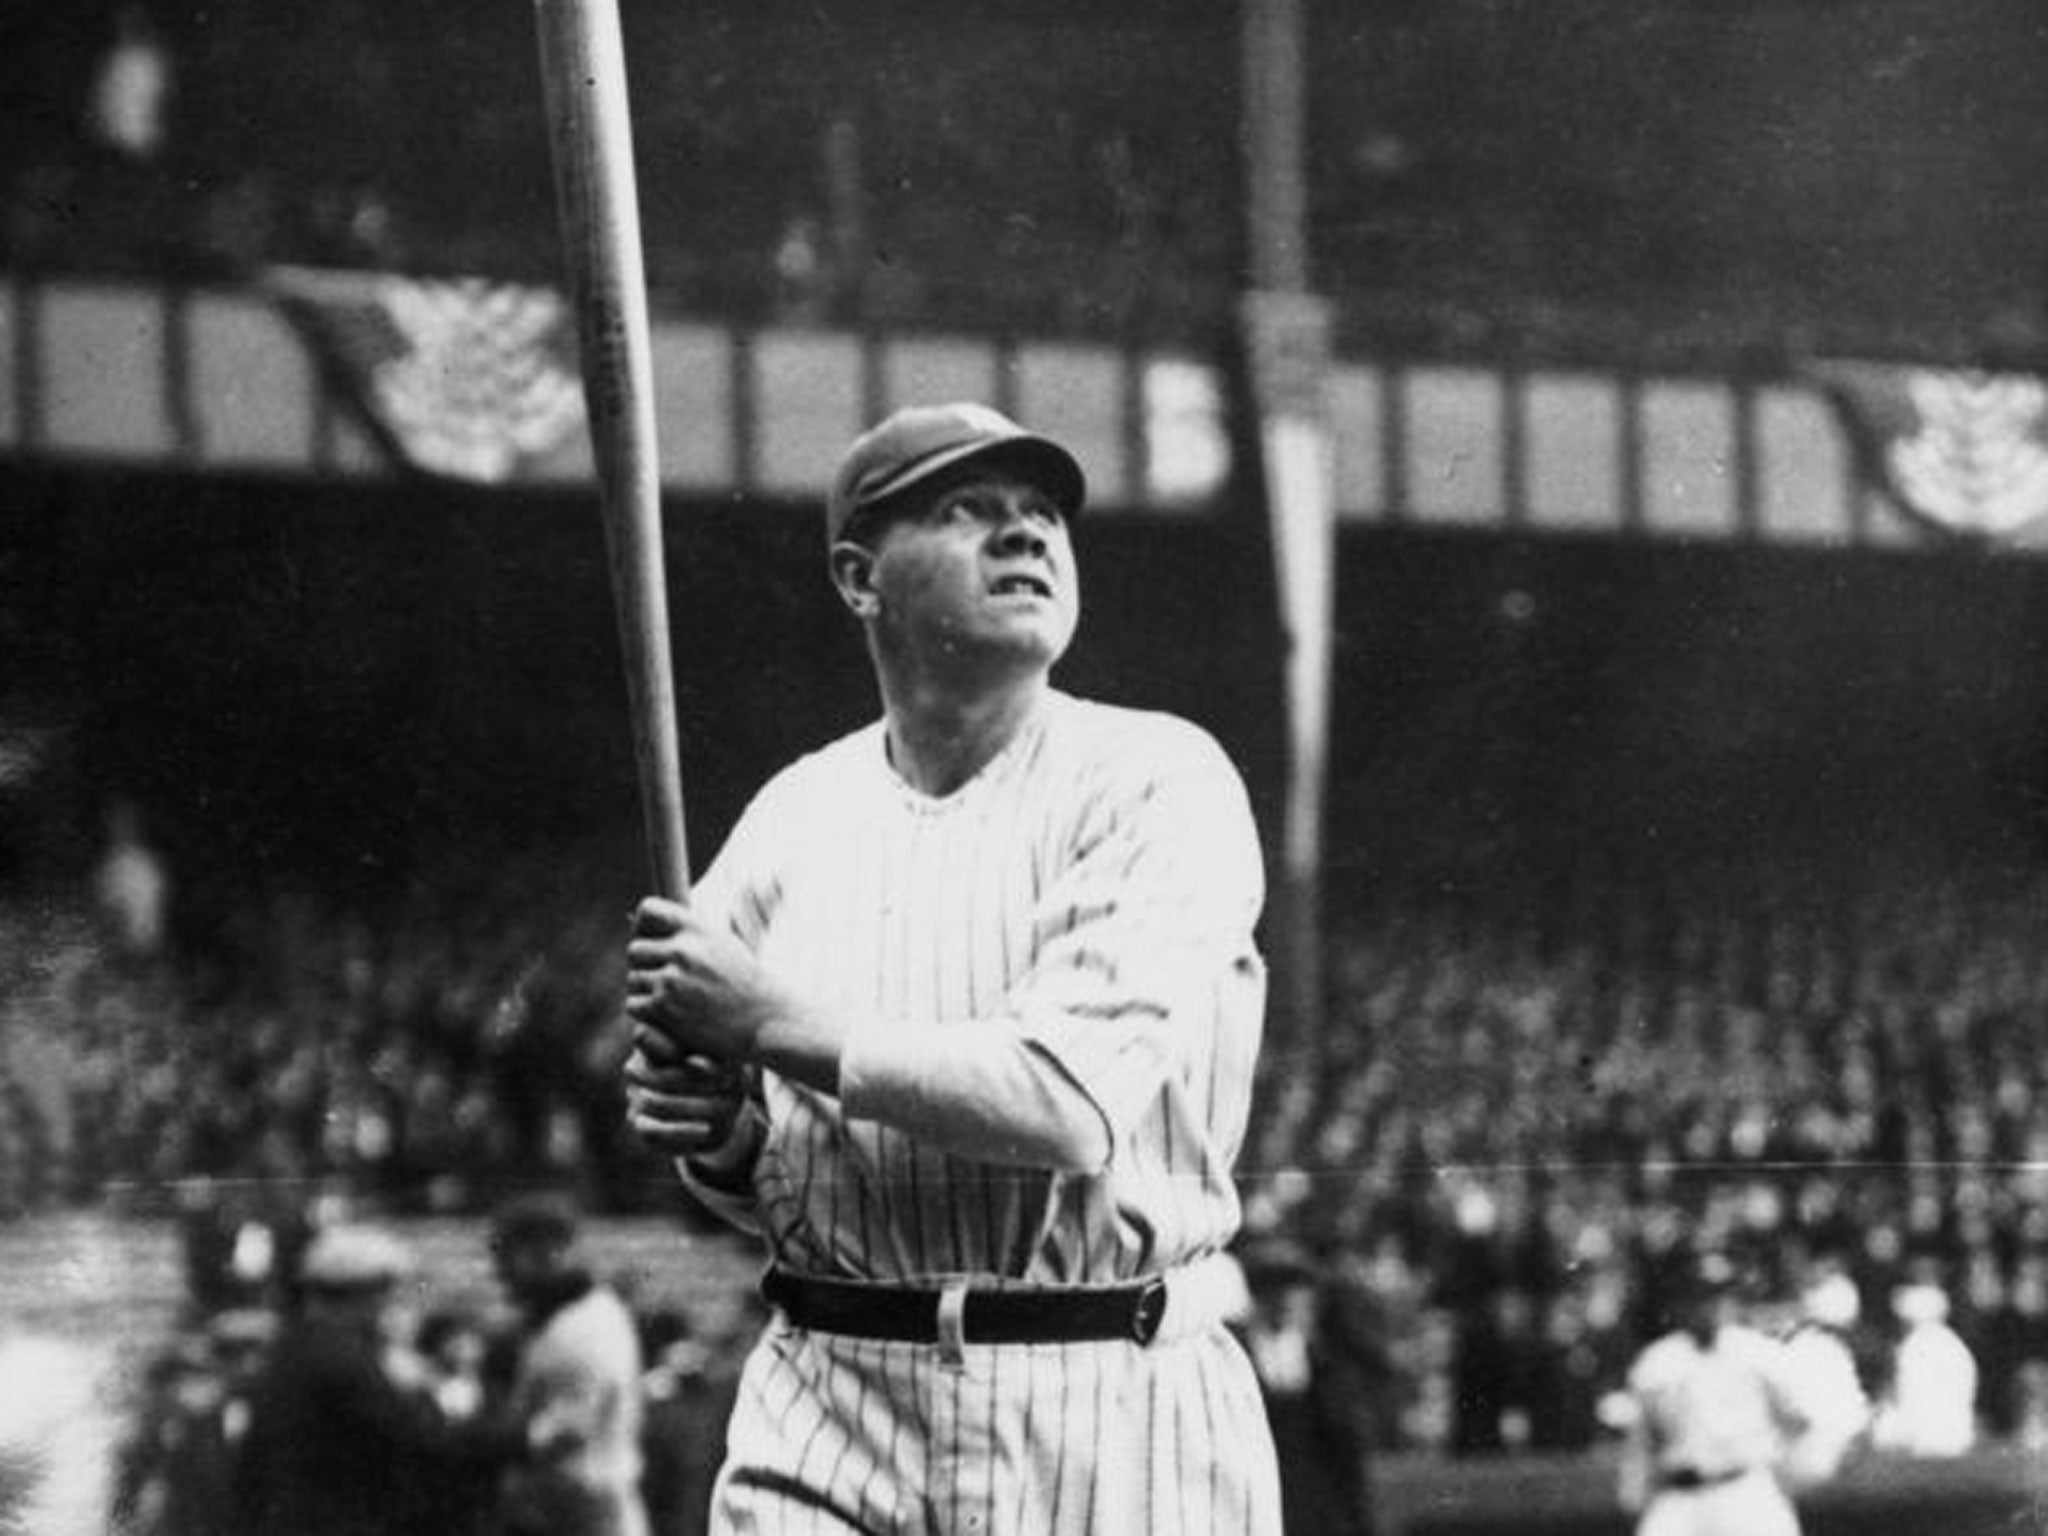 Sporting Heroes: Babe, still the daddy of them all in baseball